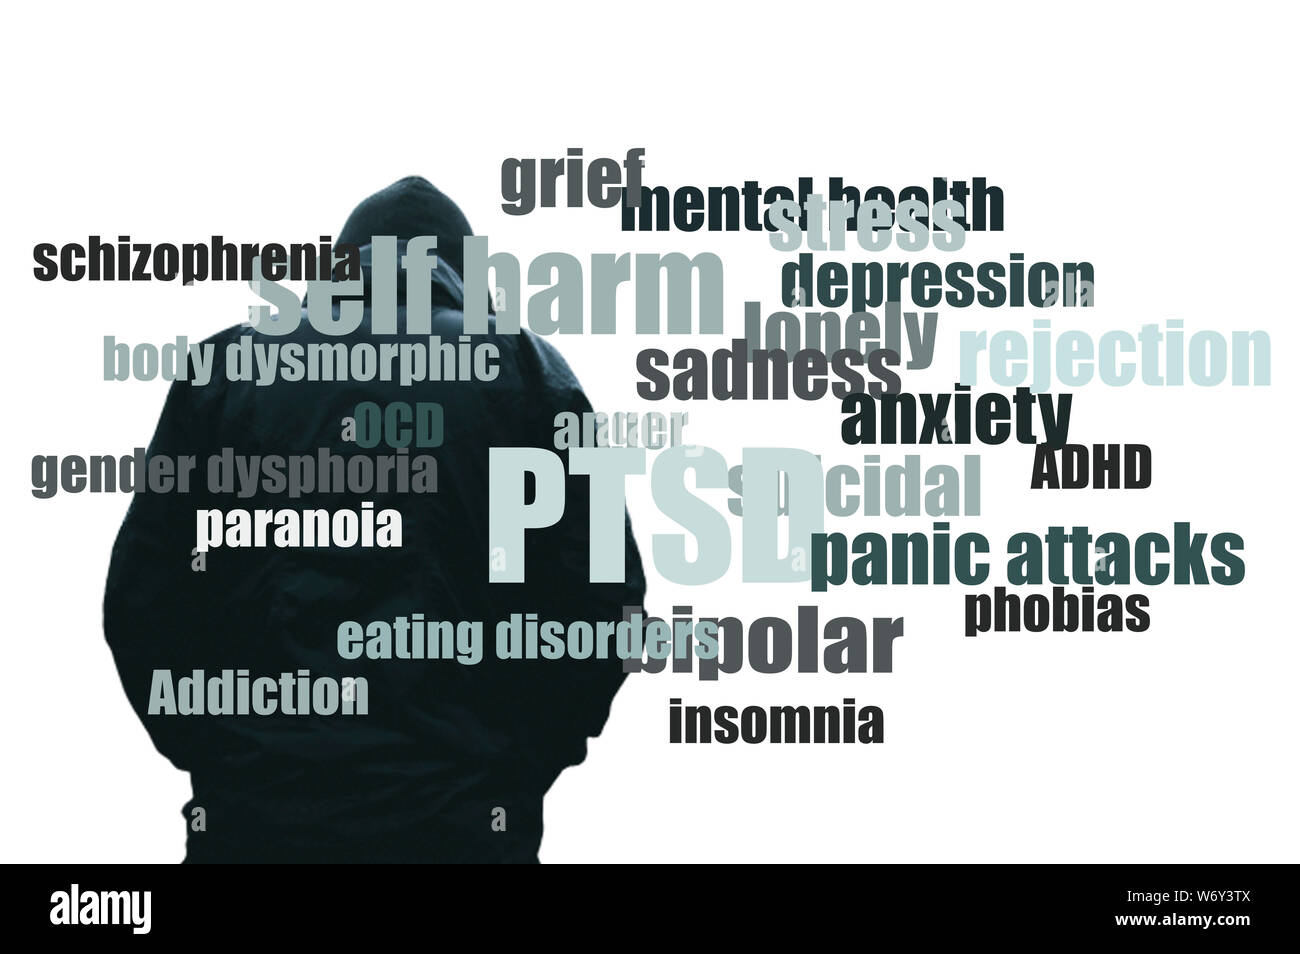 A hooded man looking down and in pain. With a word cloud of mental health issues. On a plain white background. Stock Photo